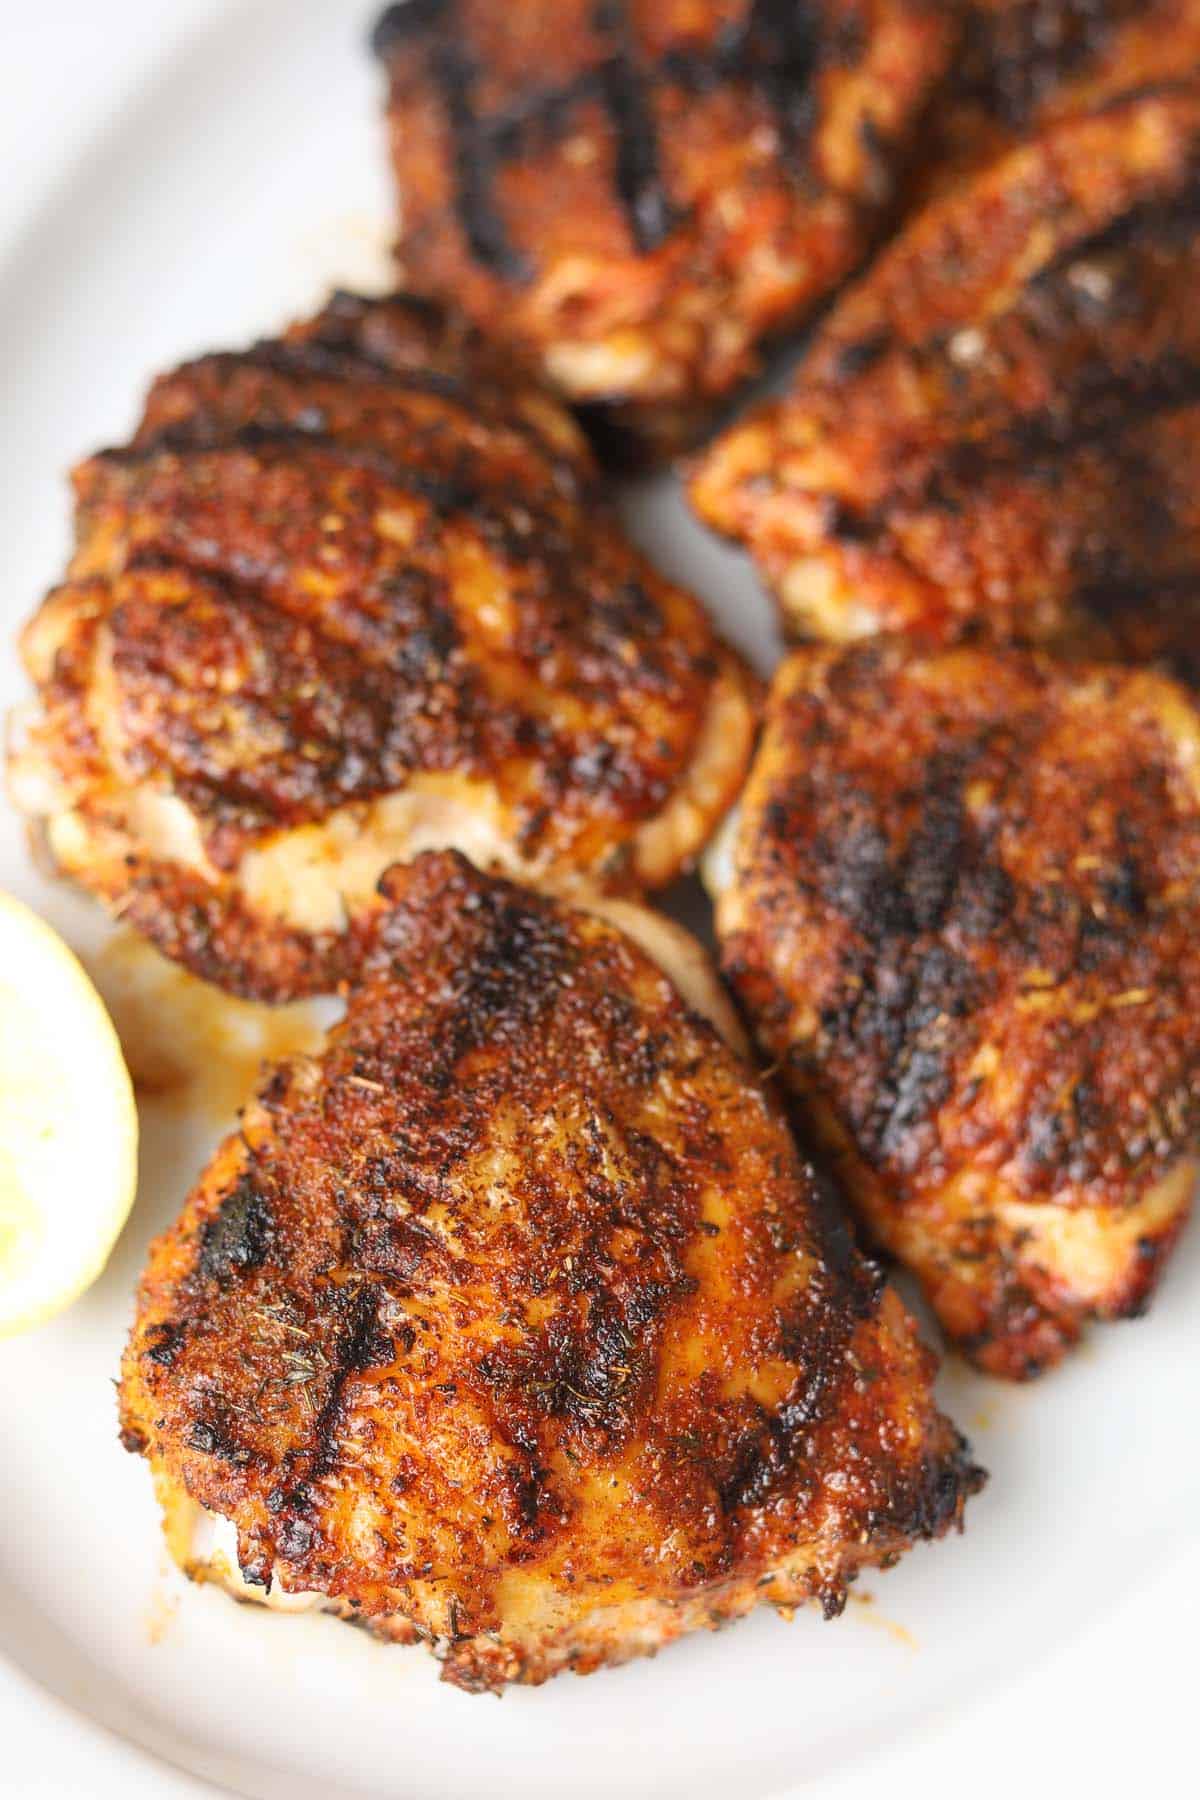 Grilled chicken thighs with skin.